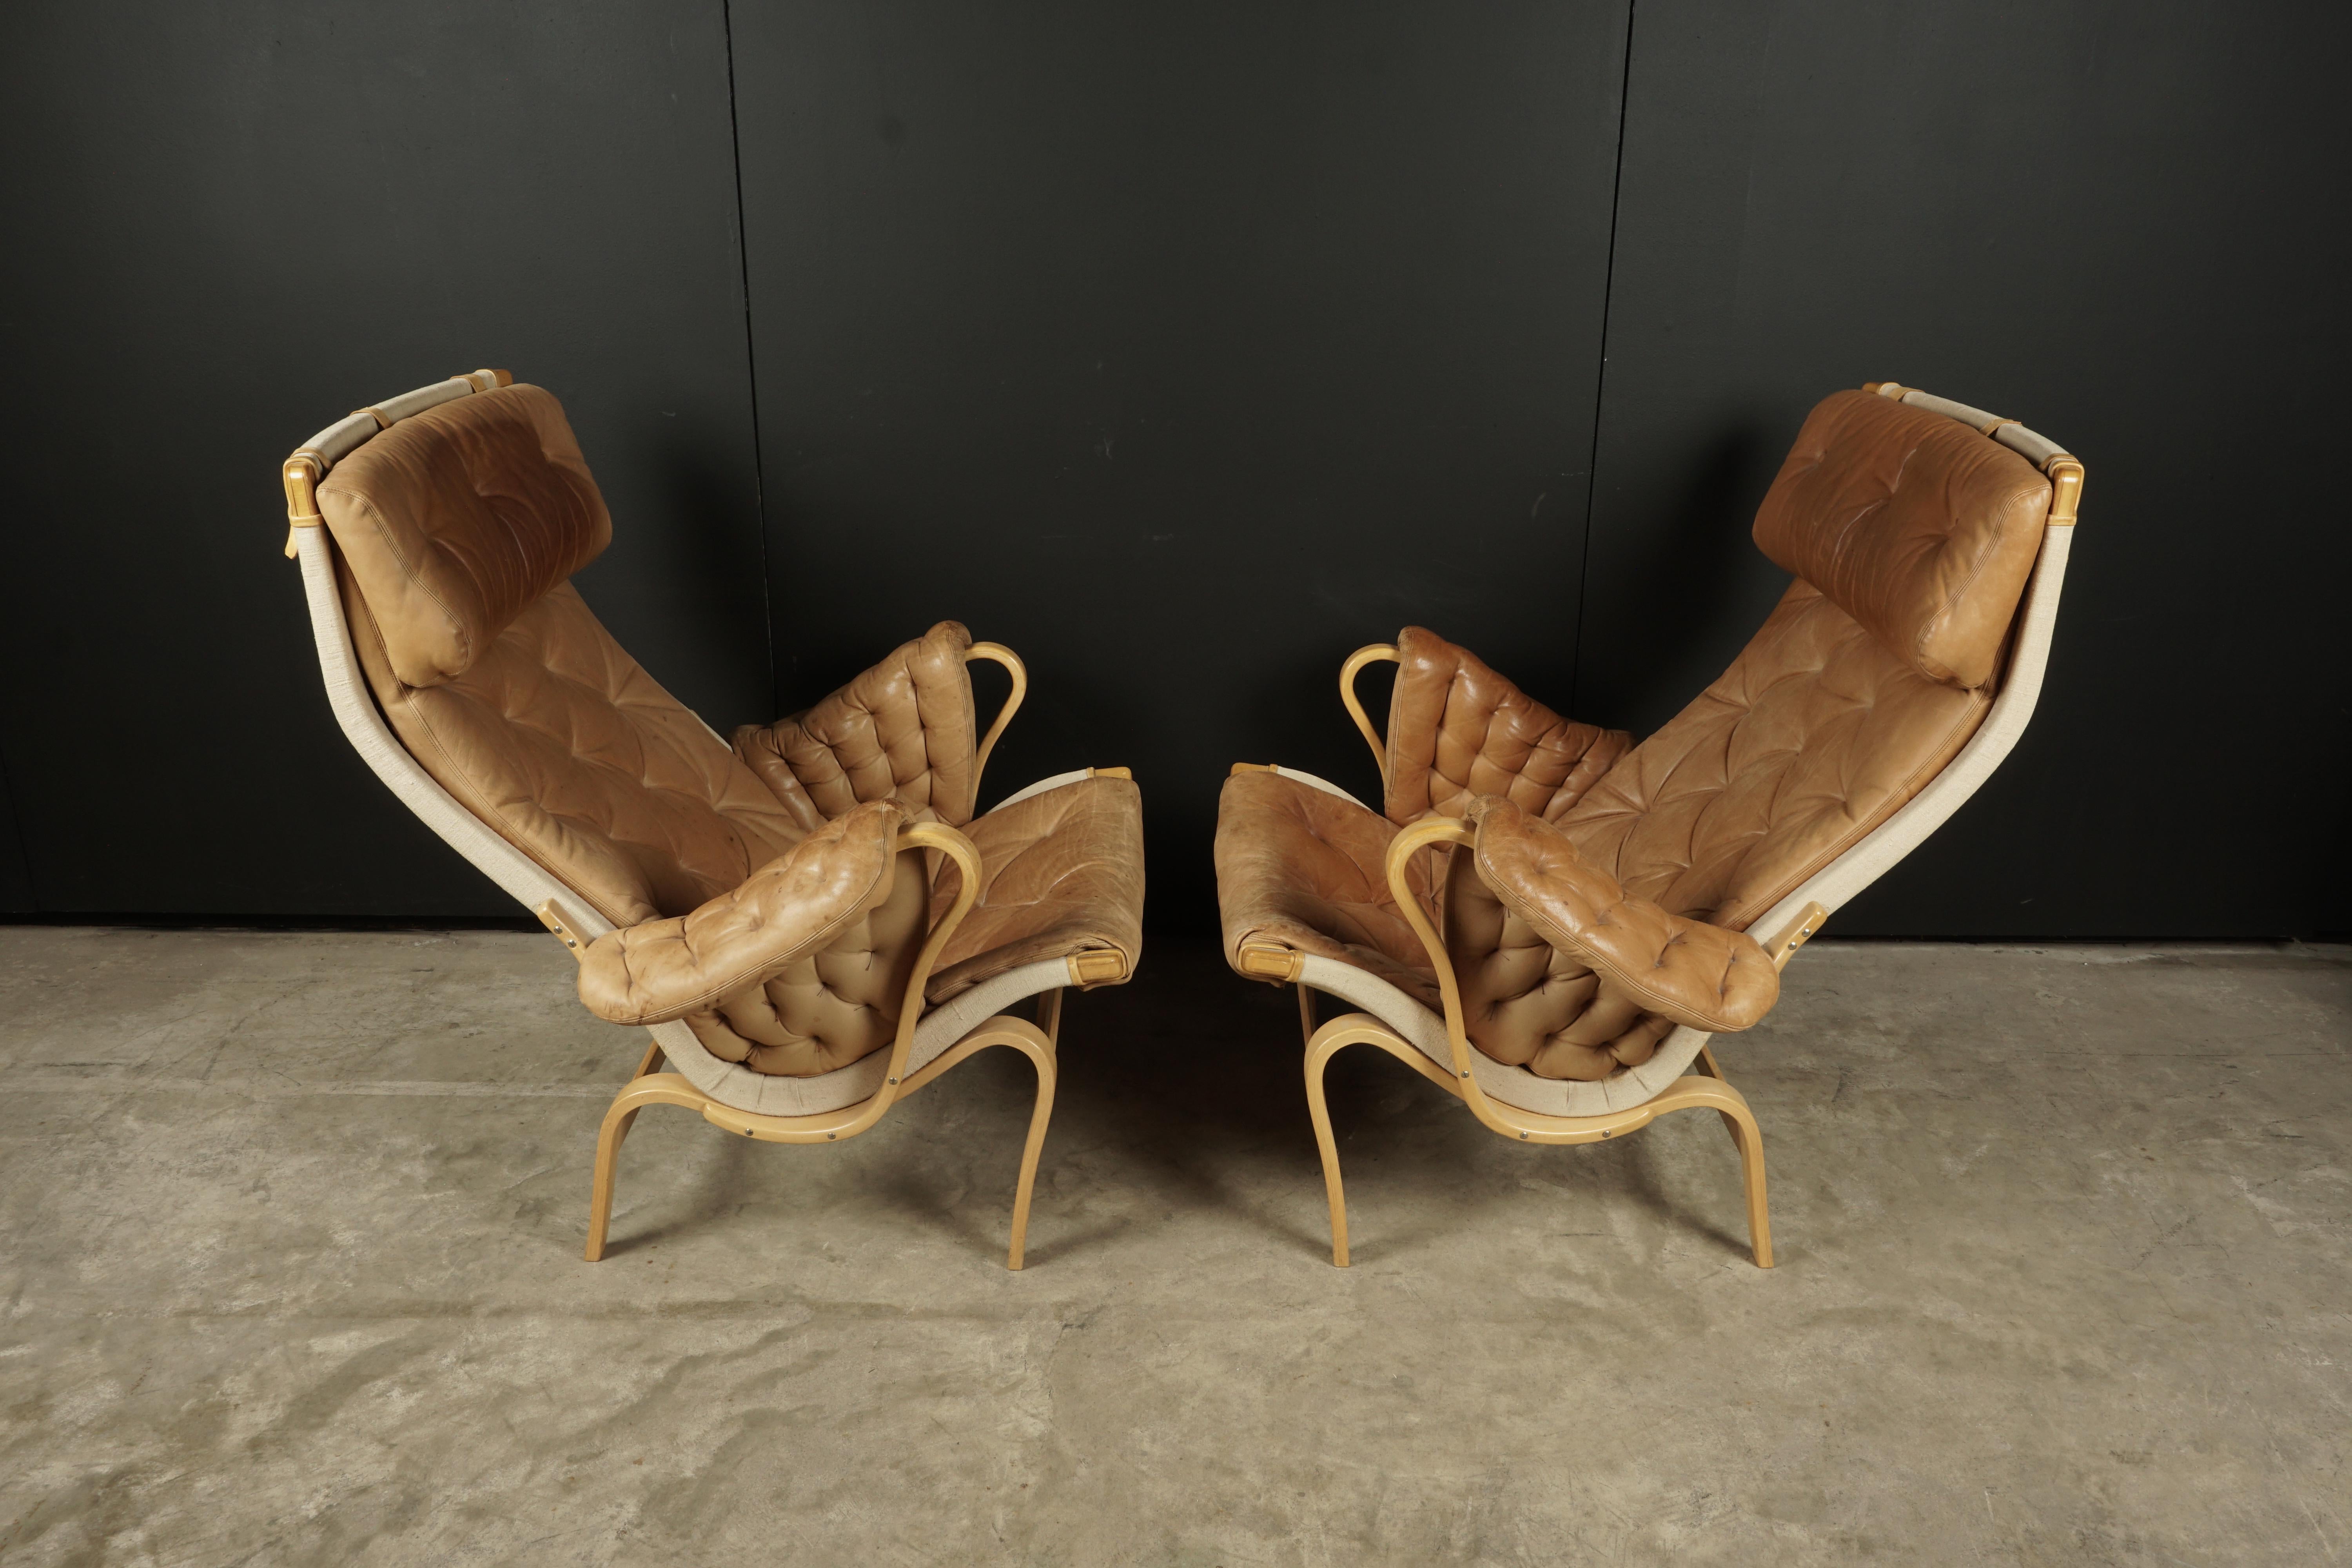 Pair of Bruno Mathsson Pernilla lounge chairs, Sweden, 1980s. Original tufted leather upholstery with a molded beech frame.